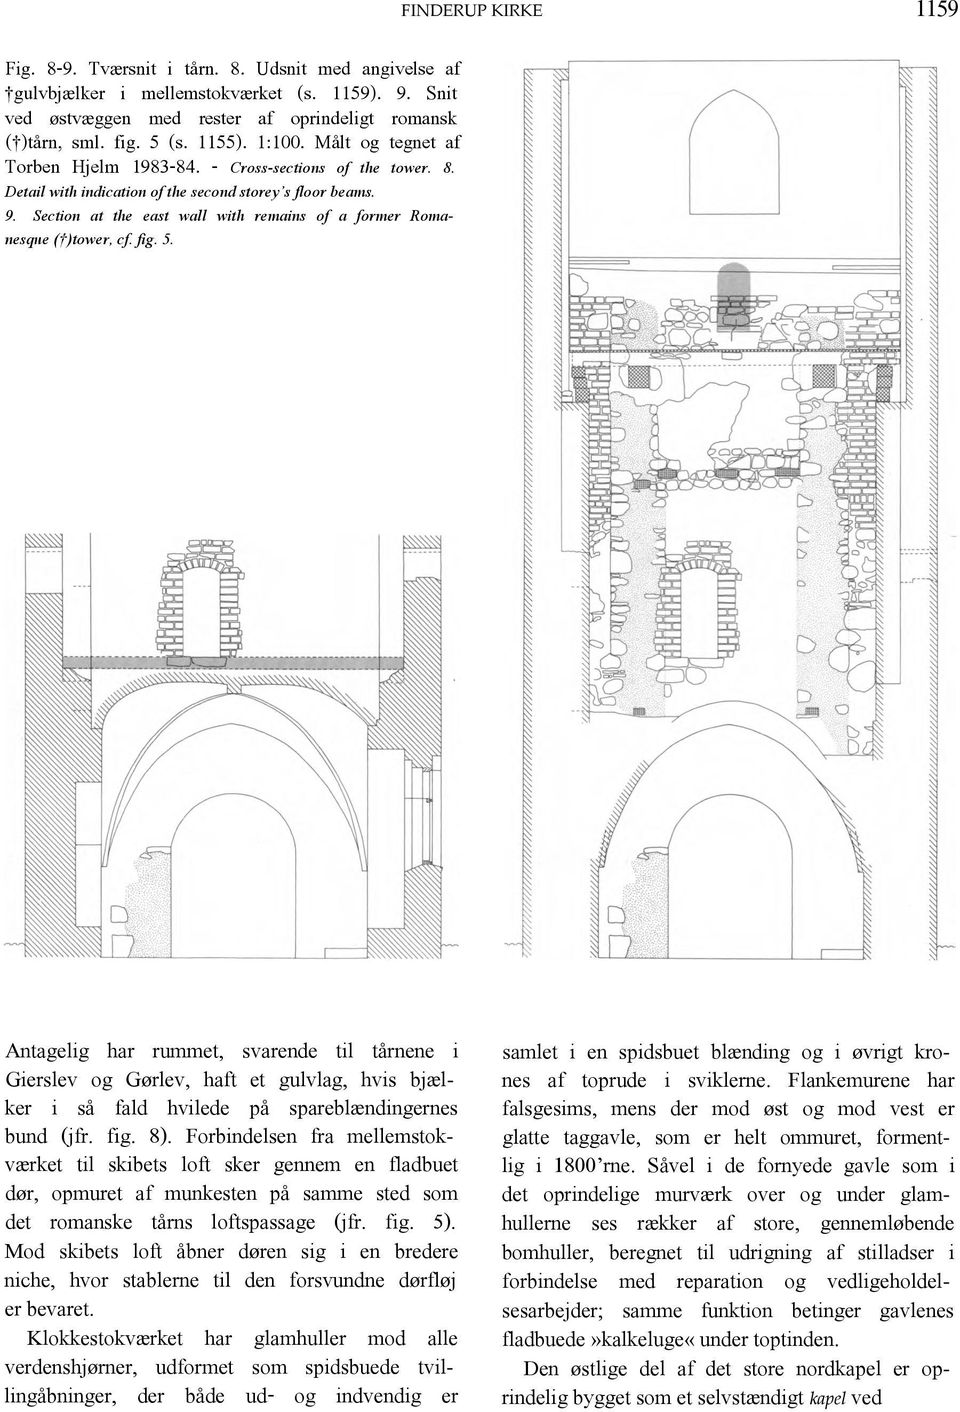 Section at the east wall with remains of a former Romanesque ( )tower, cf. fig. 5.